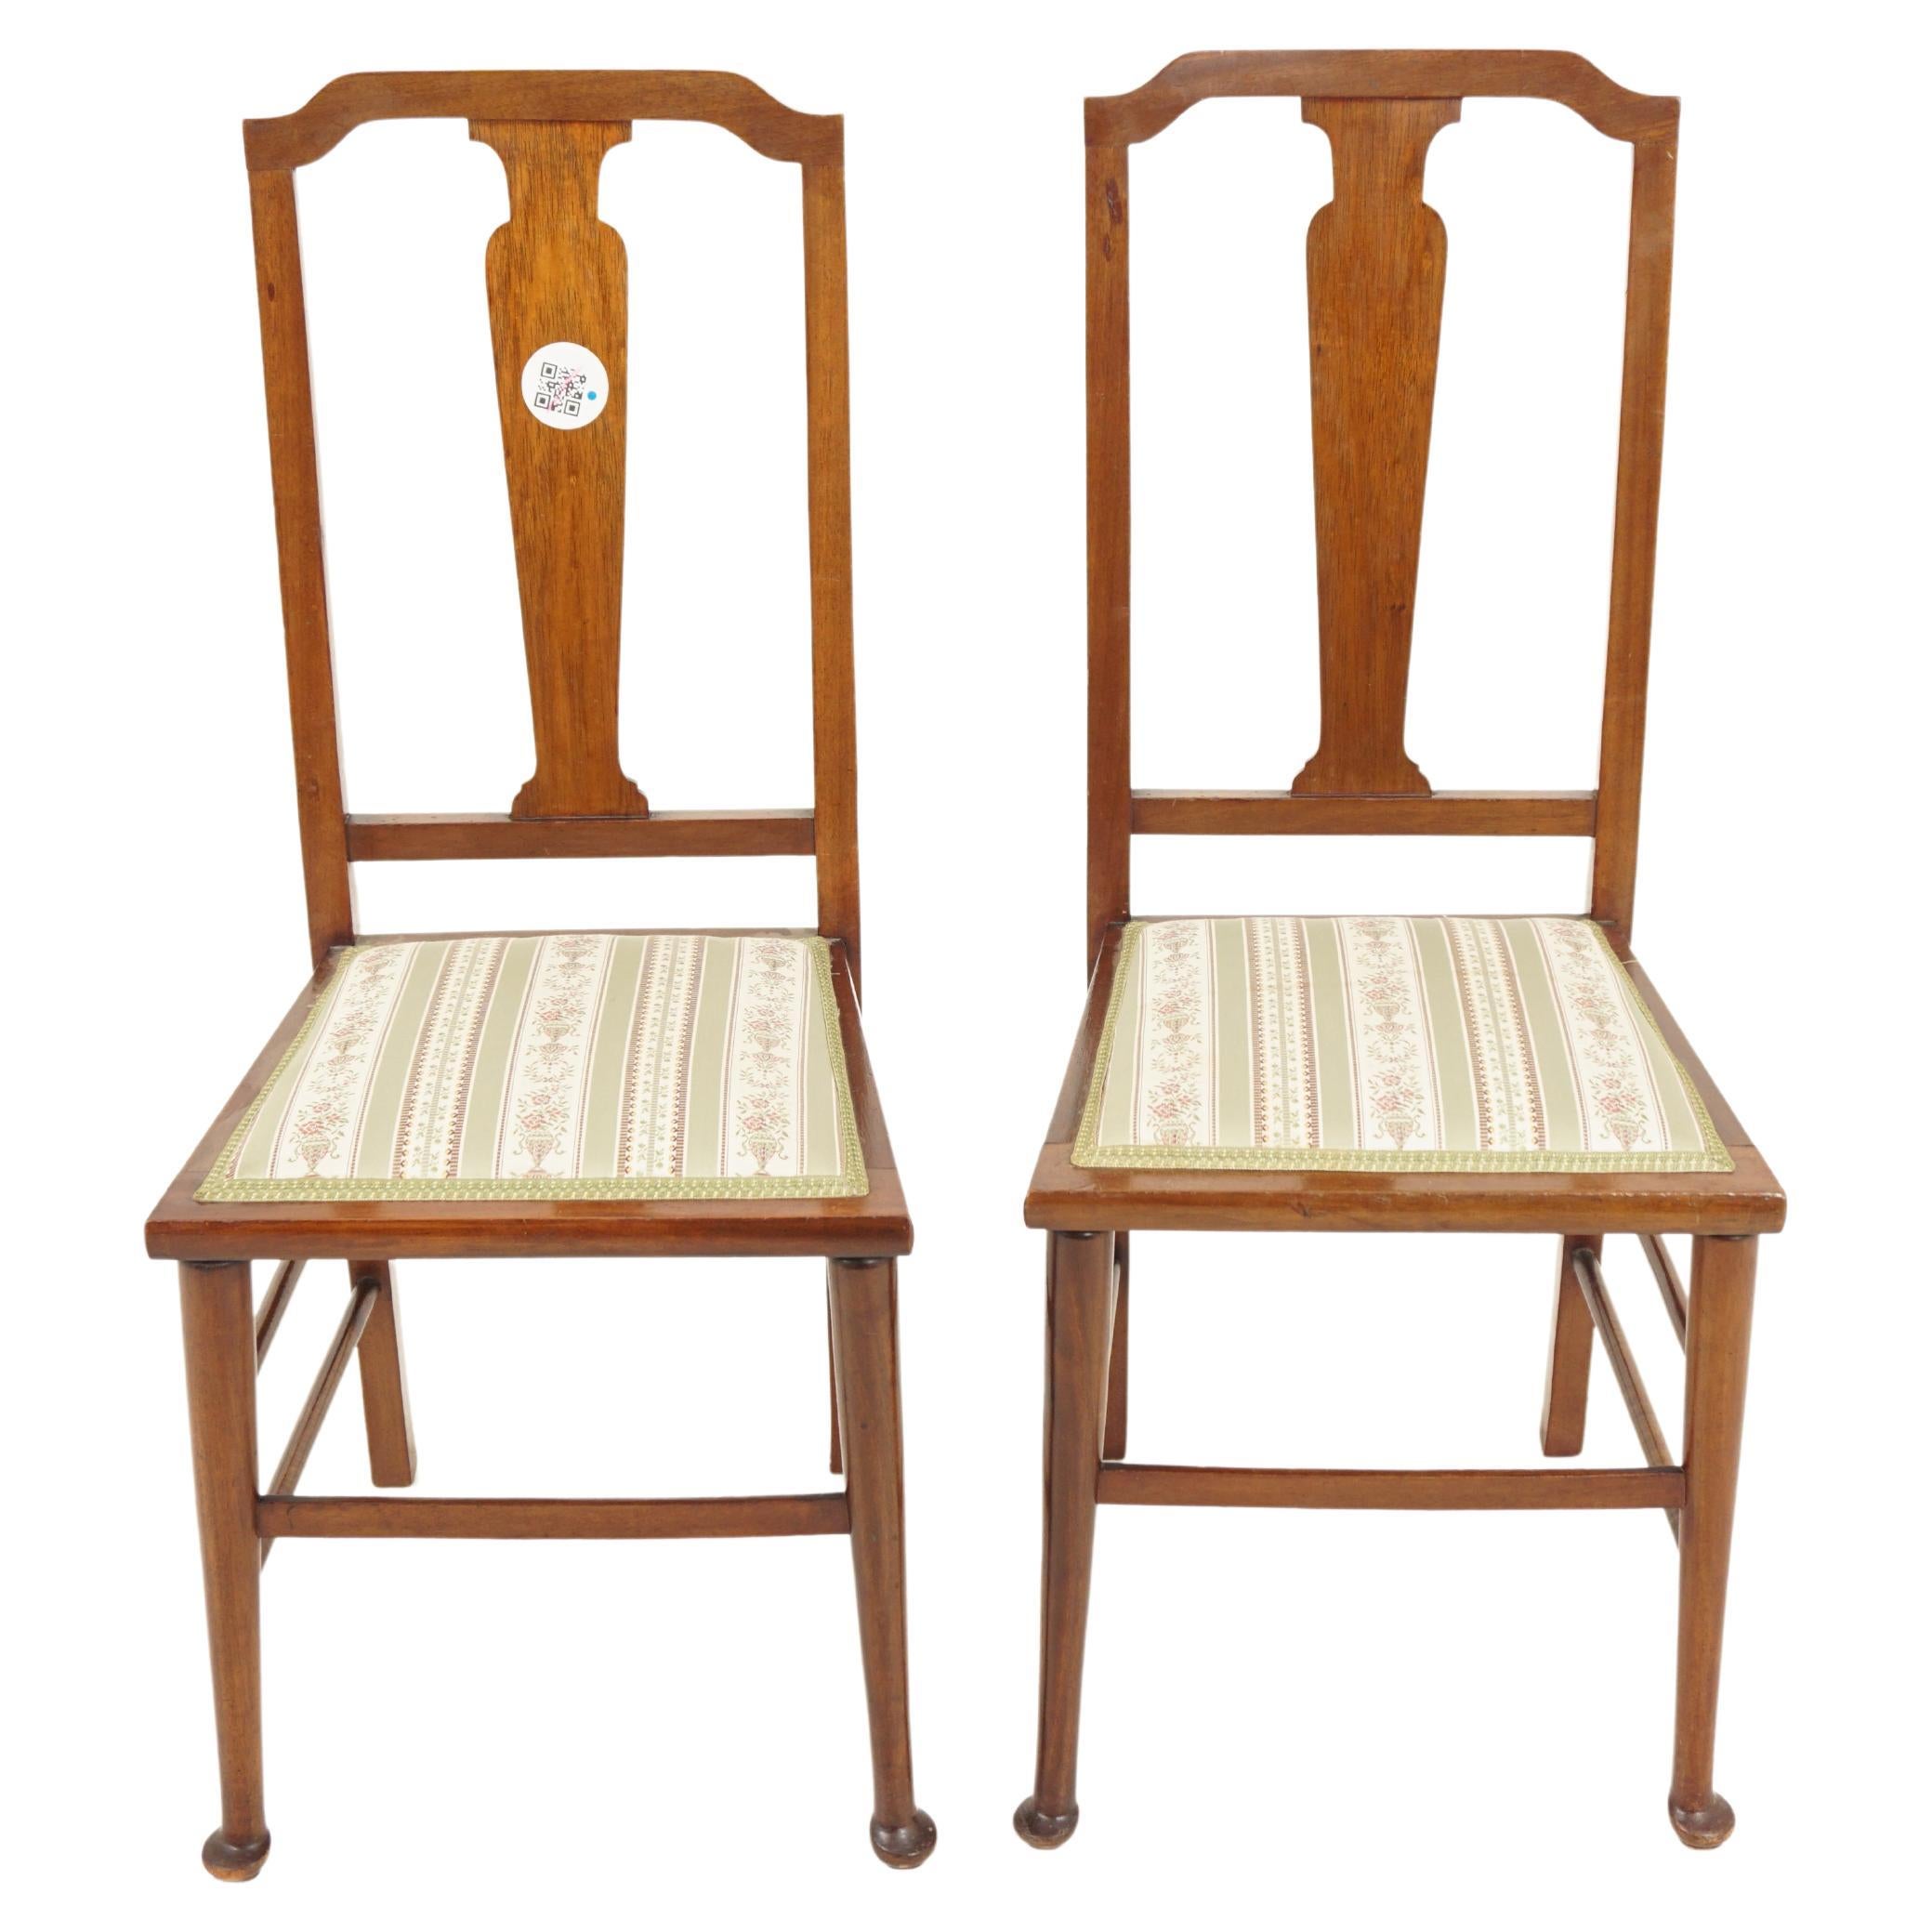 Pair of Edwardian Walnut Bedroom Chairs, Scotland 1910, H067 For Sale